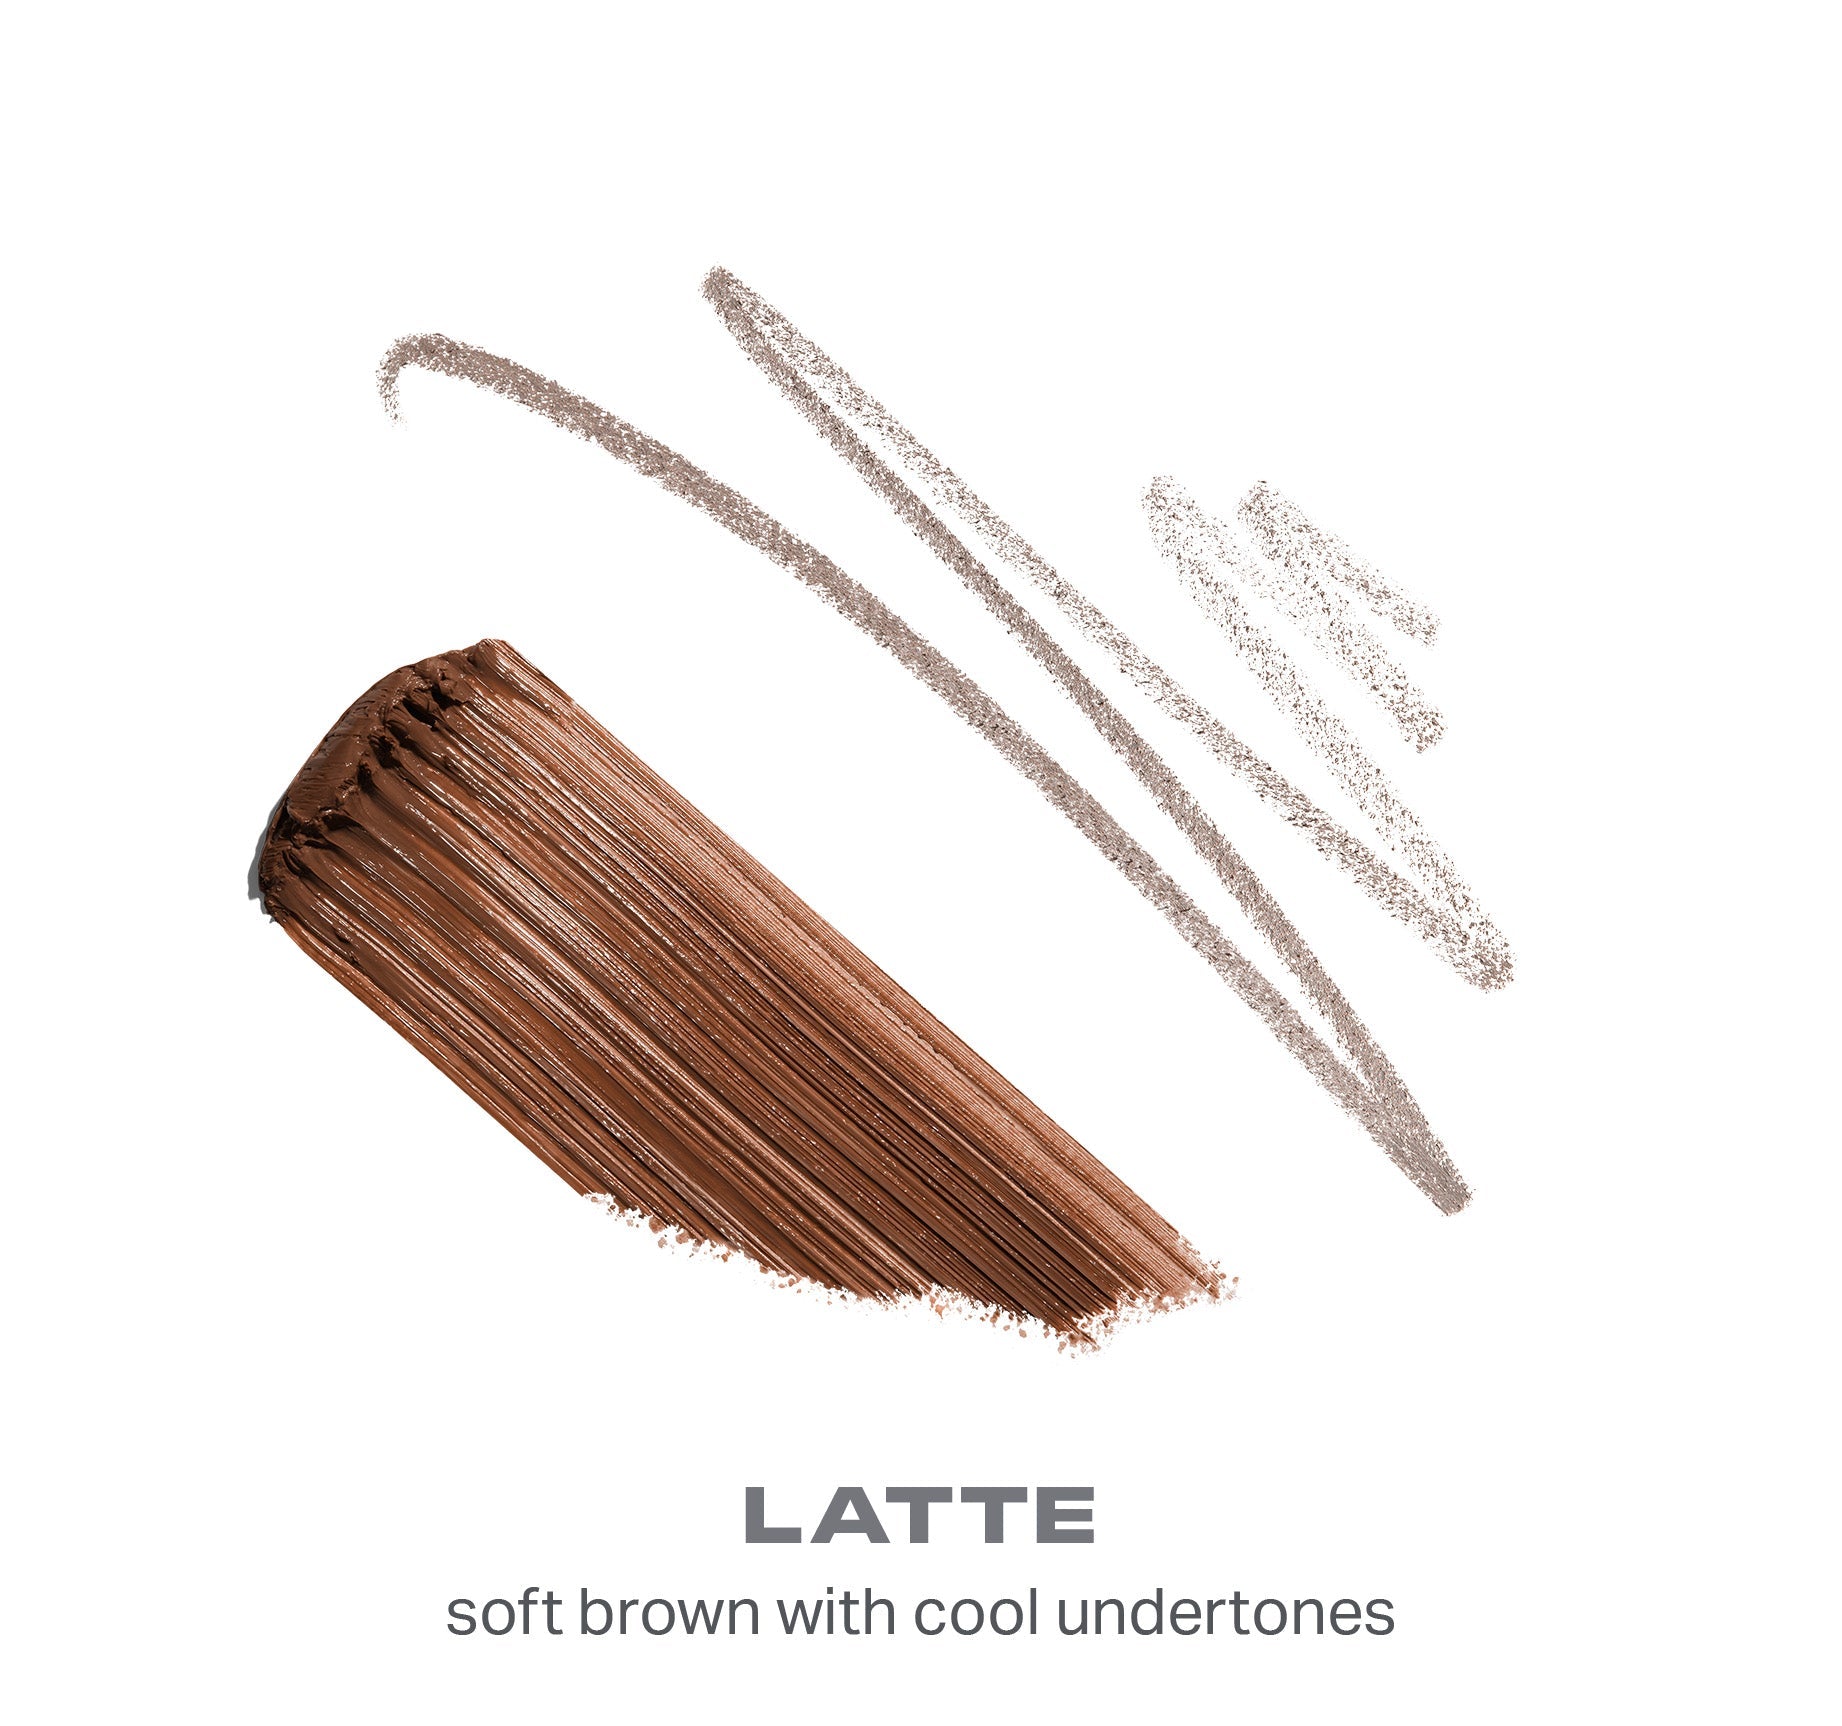 High Archiever Everyday Essentials Brow Kit - Latte - Image 2